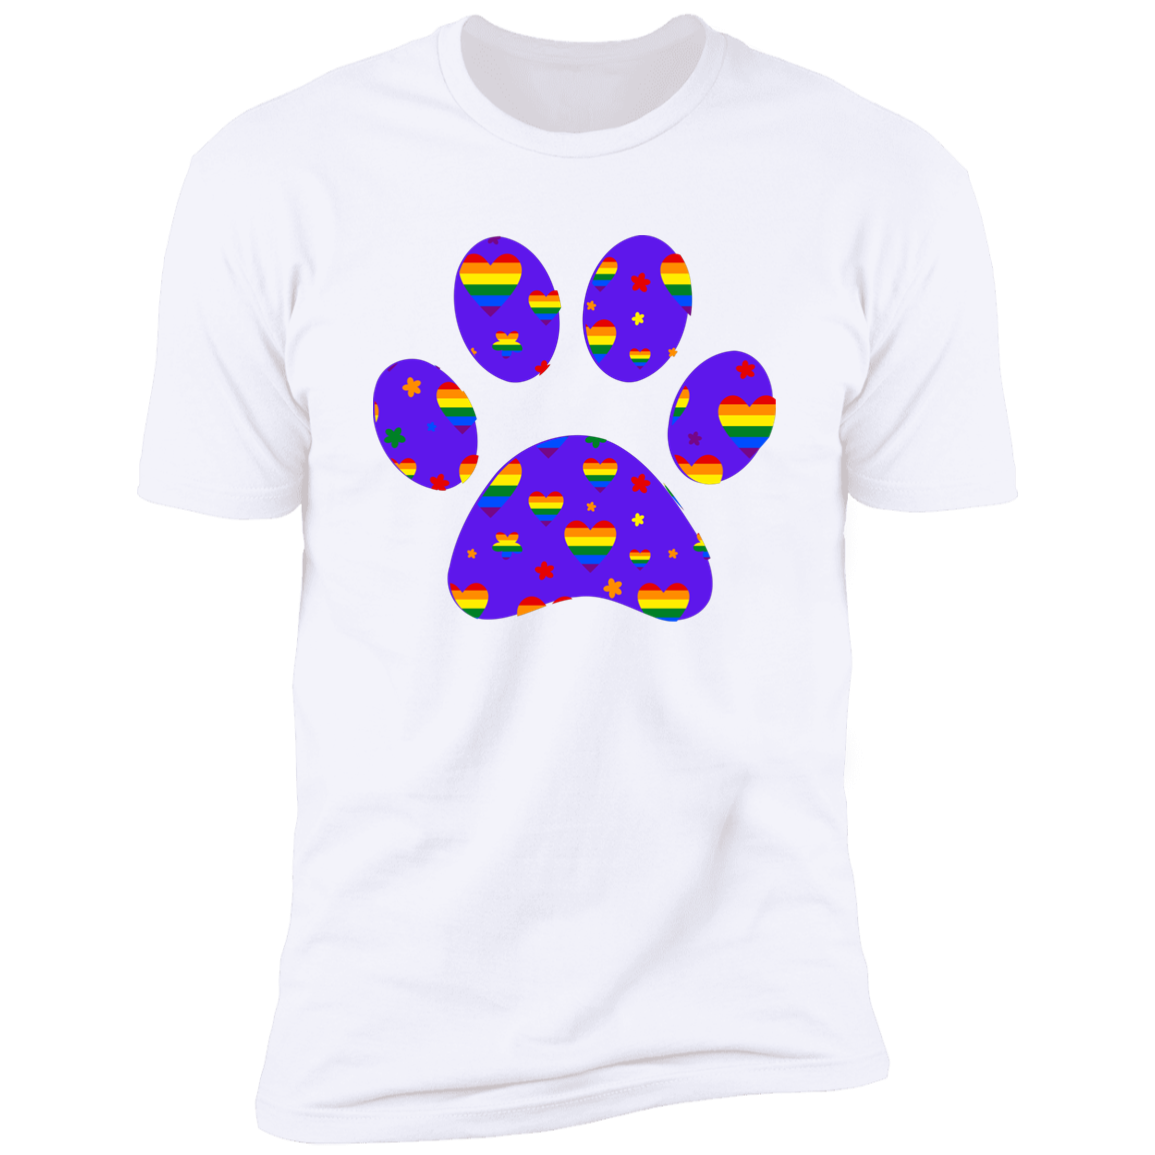 Pride Paw 2023 (Hearts) Pride T-shirt, Paw Pride Dog Shirt for humans, in white